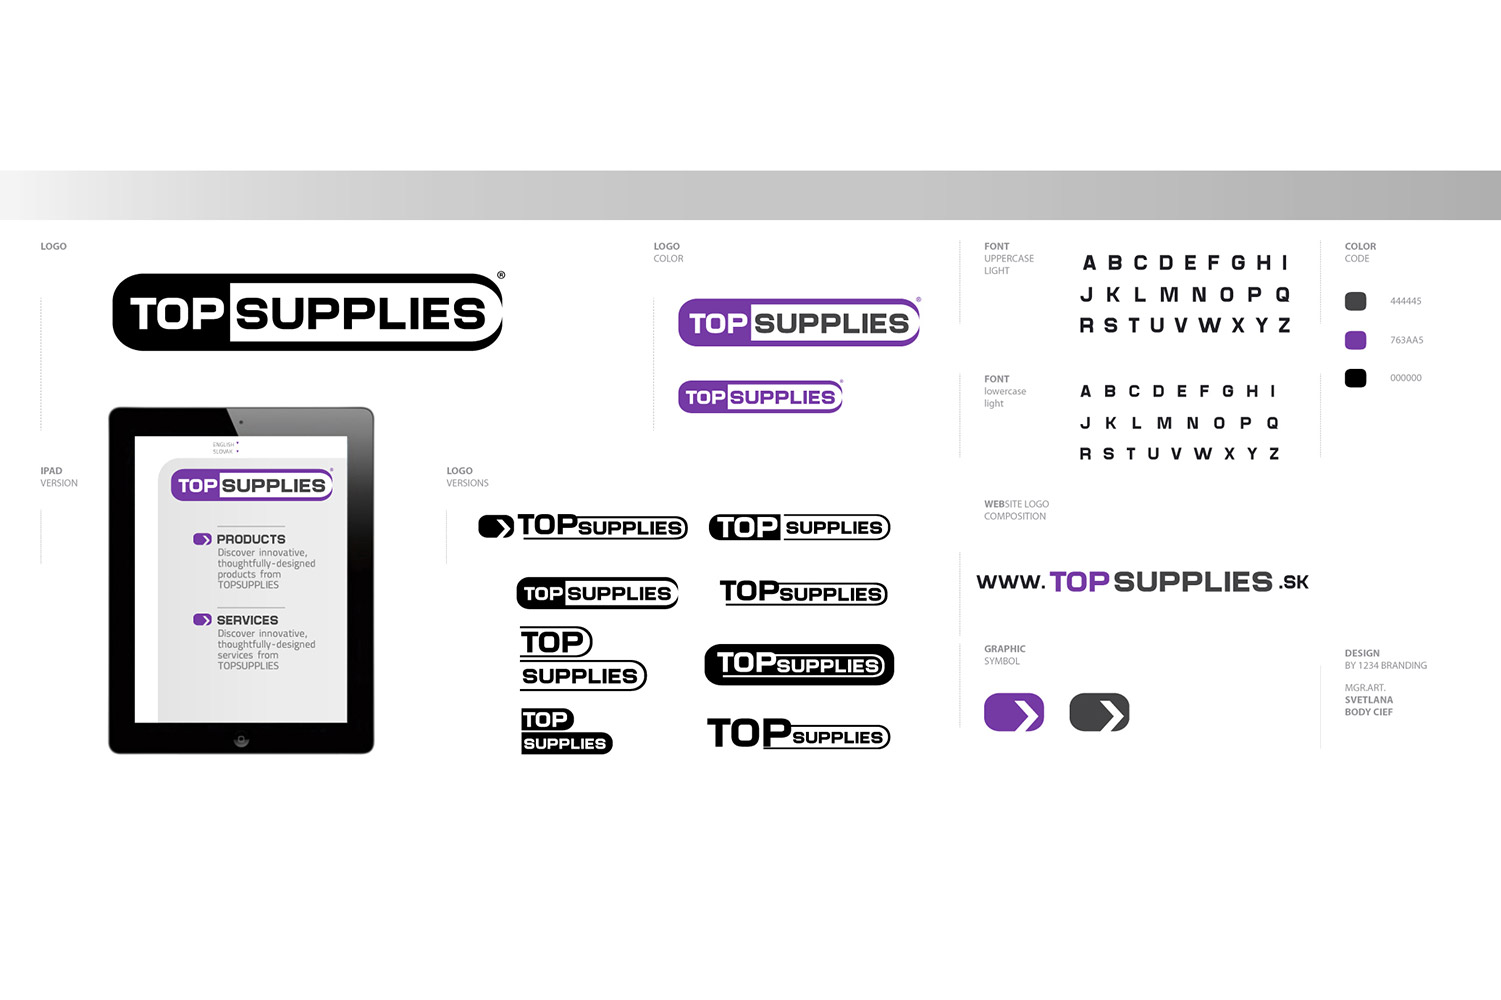 Top Supplies, Corporate Identity image